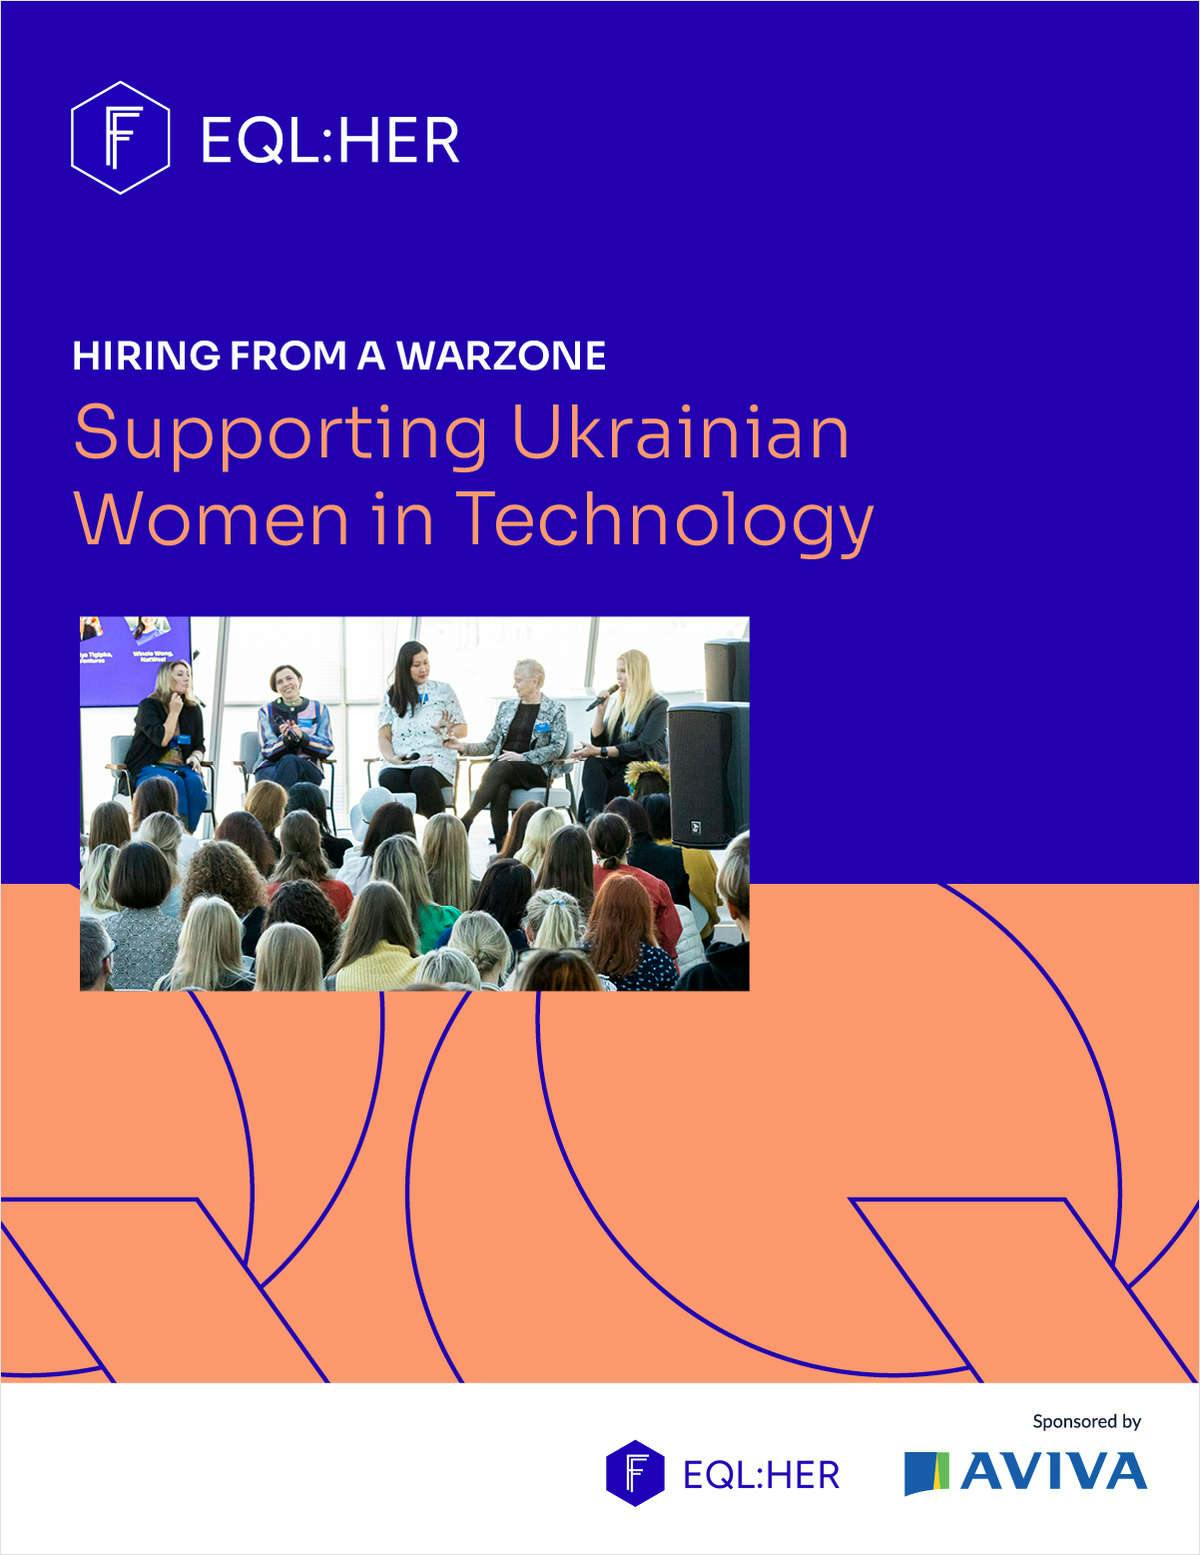 Free eBook: "Hiring from a Warzone: Supporting Ukrainian Women in Technology"